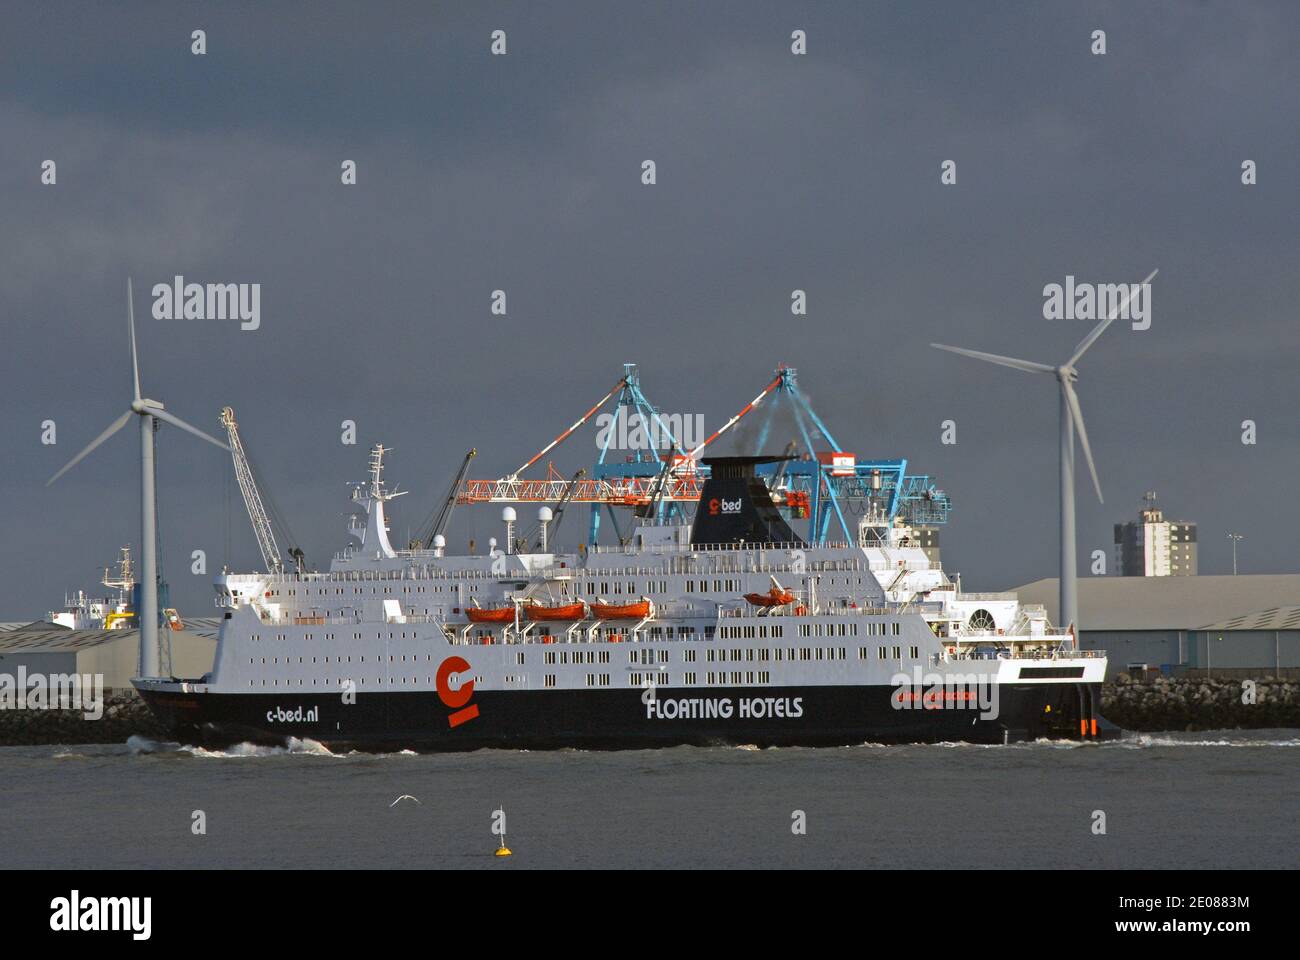 WIND PERFECTION, C-BED Floating Hotels largest accommodation ship, departs from LIVERPOOL outward for the WEST OF DUDDON SANDS WIND FARM, IRISH SEA. Stock Photo